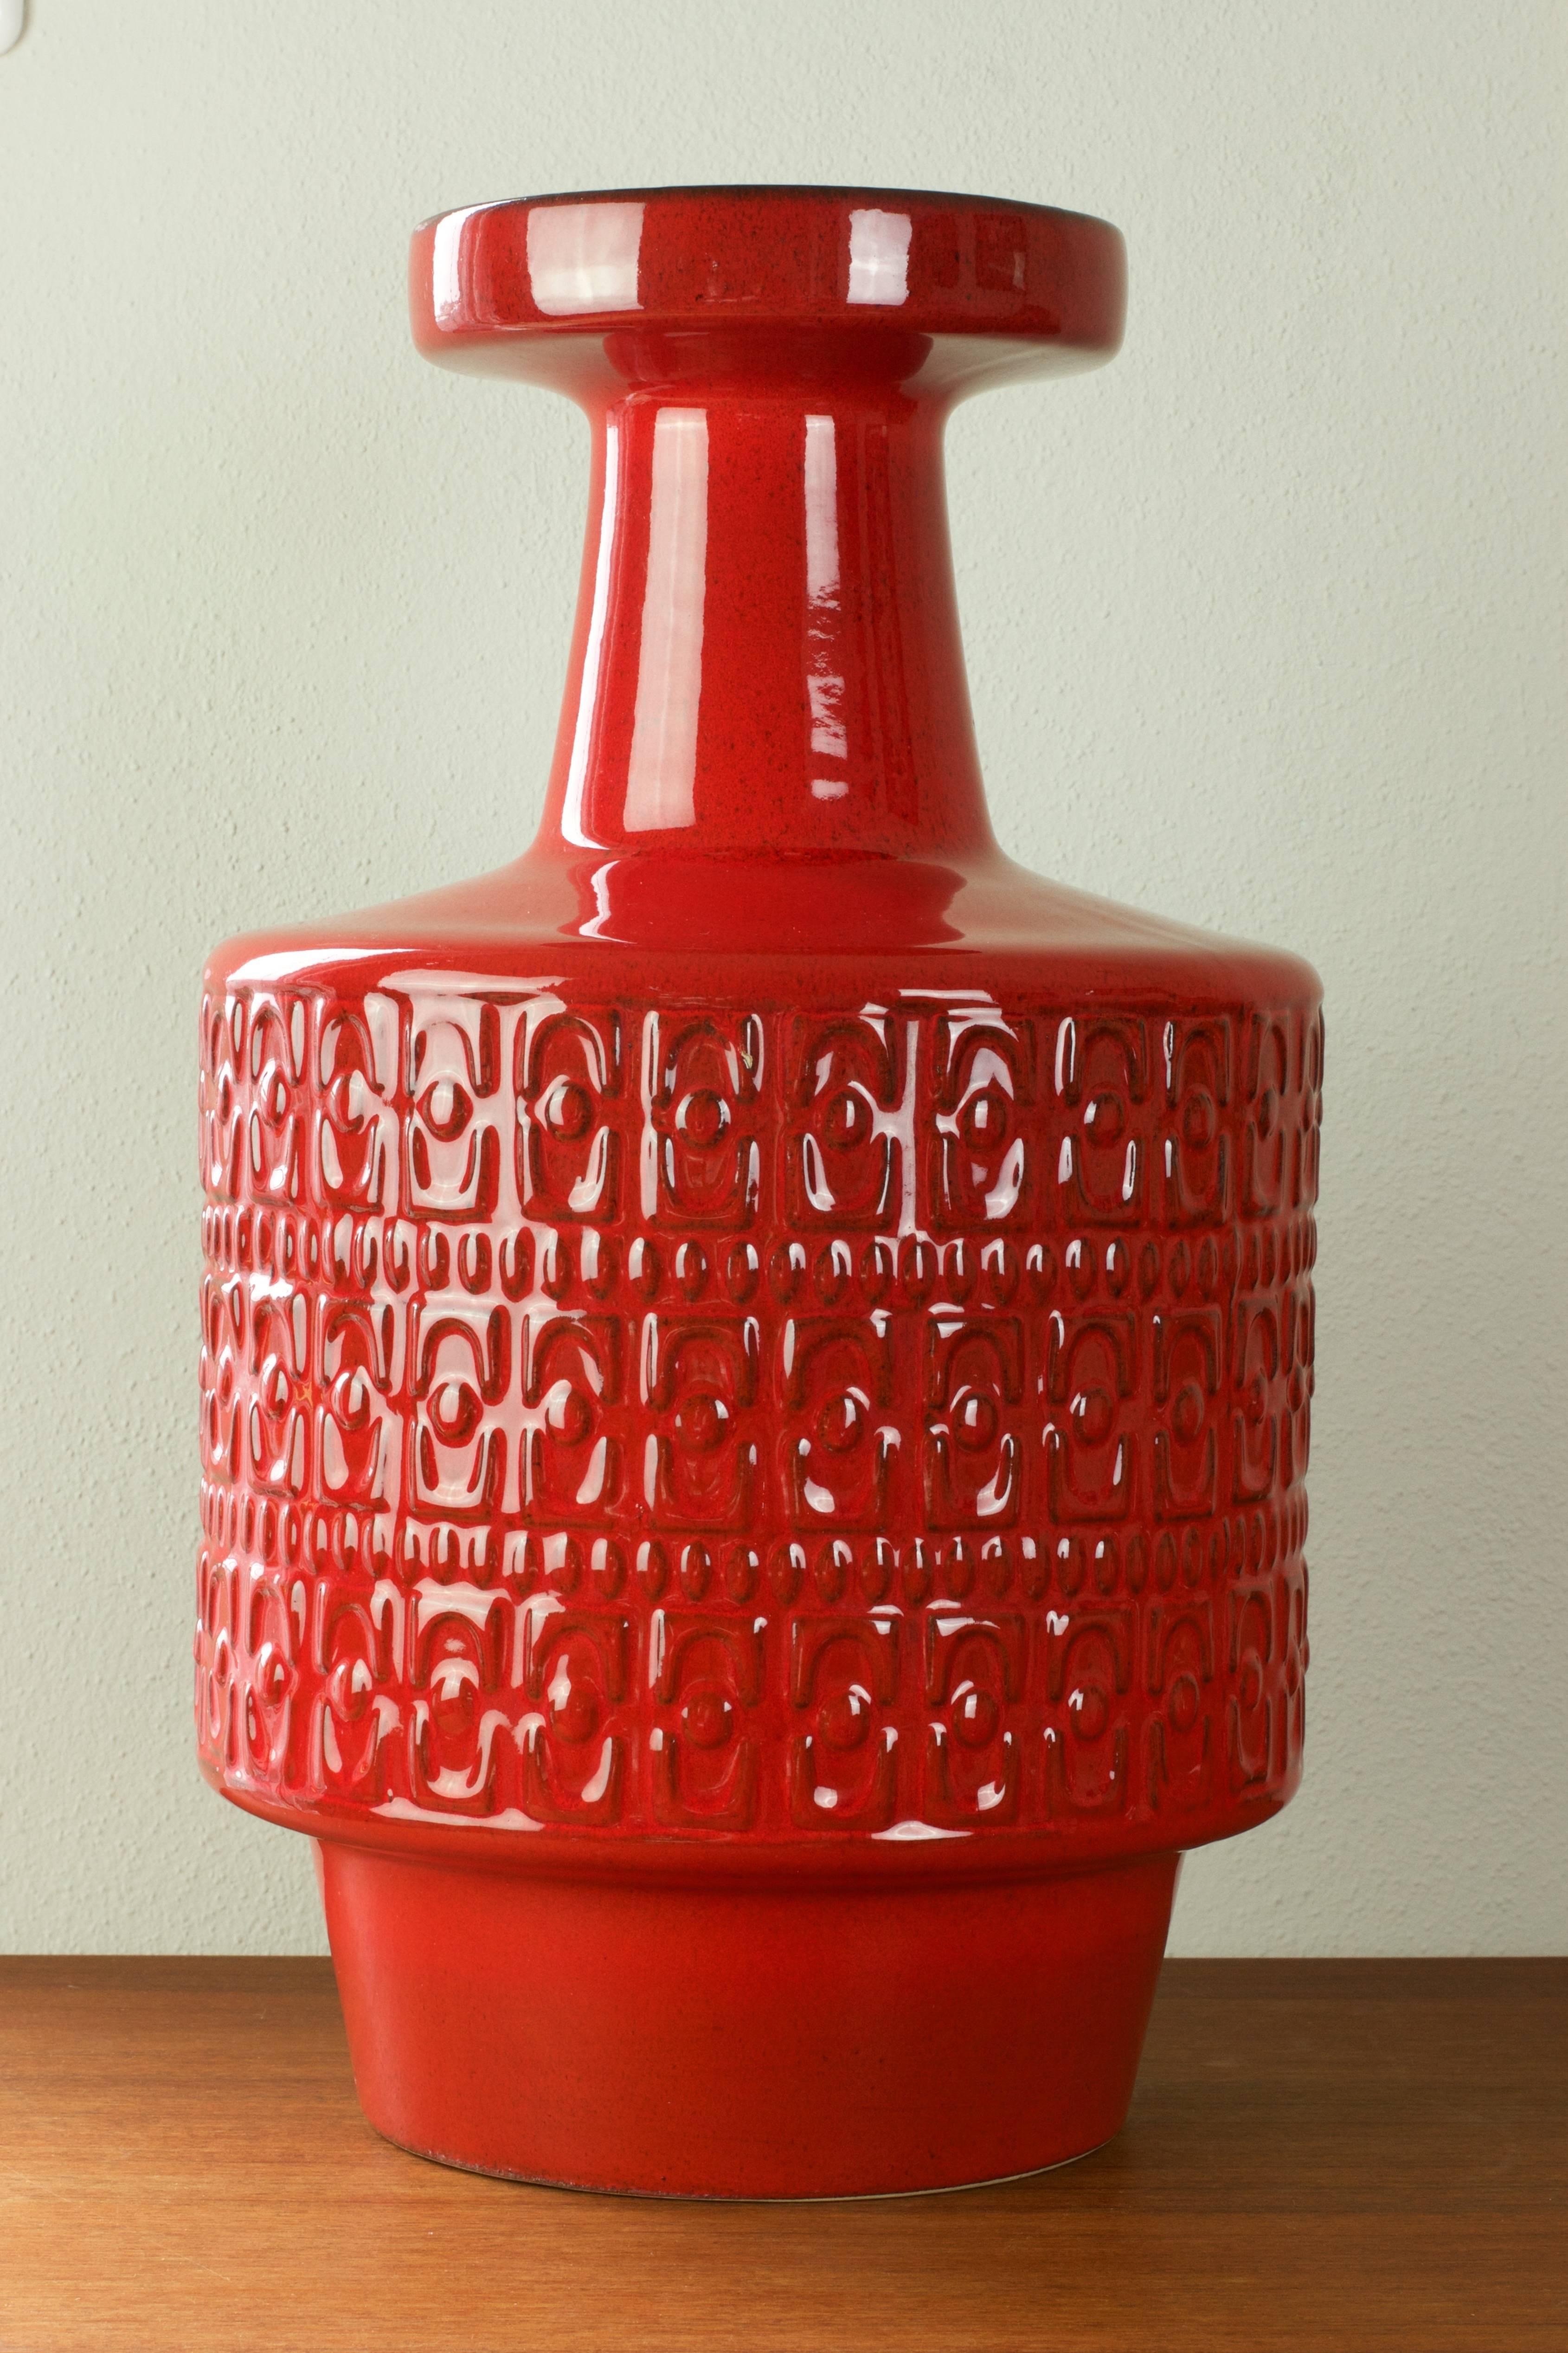 Huge floor vase by Fohr Pottery, Germany, circa 1970. The Company Fohr started producing decorative pottery in the 1950s under Wilhelm Fohr, although they were originally founded in 1859 by Peter Fohr. The vase with it's delightful form, bright red